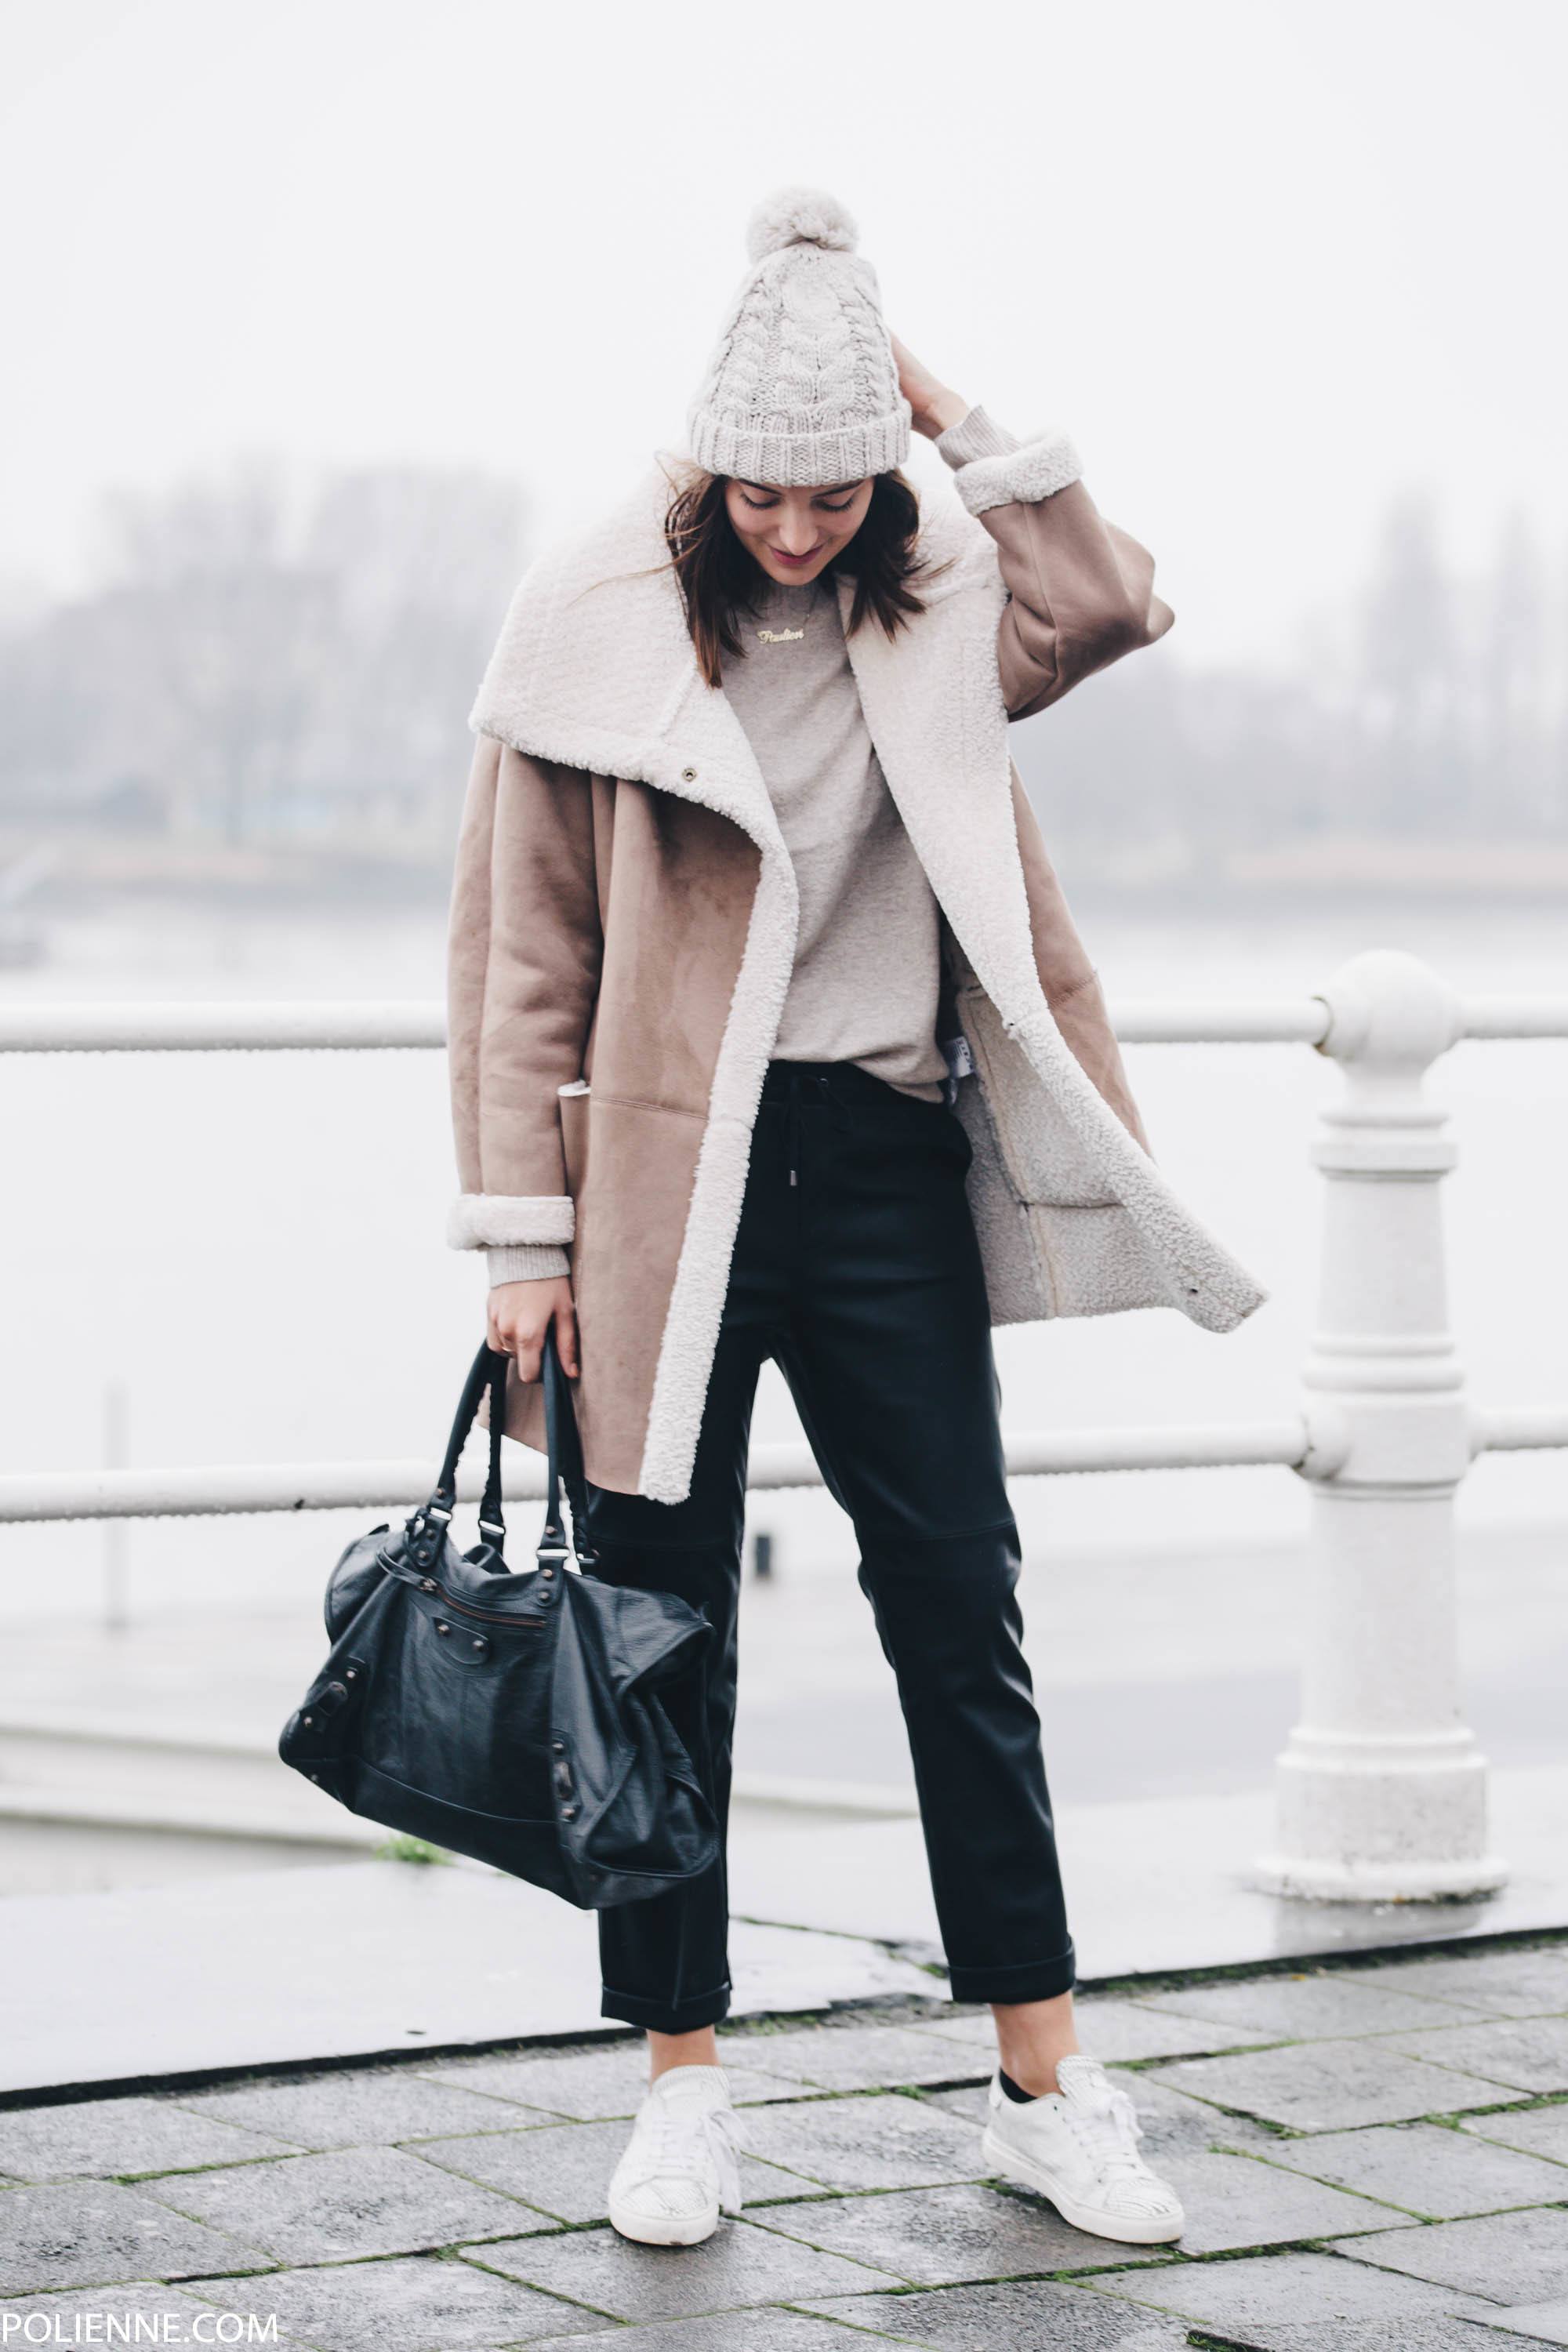 Women Outfits with Shearling Coats-19 Ways to Wear Stylishly